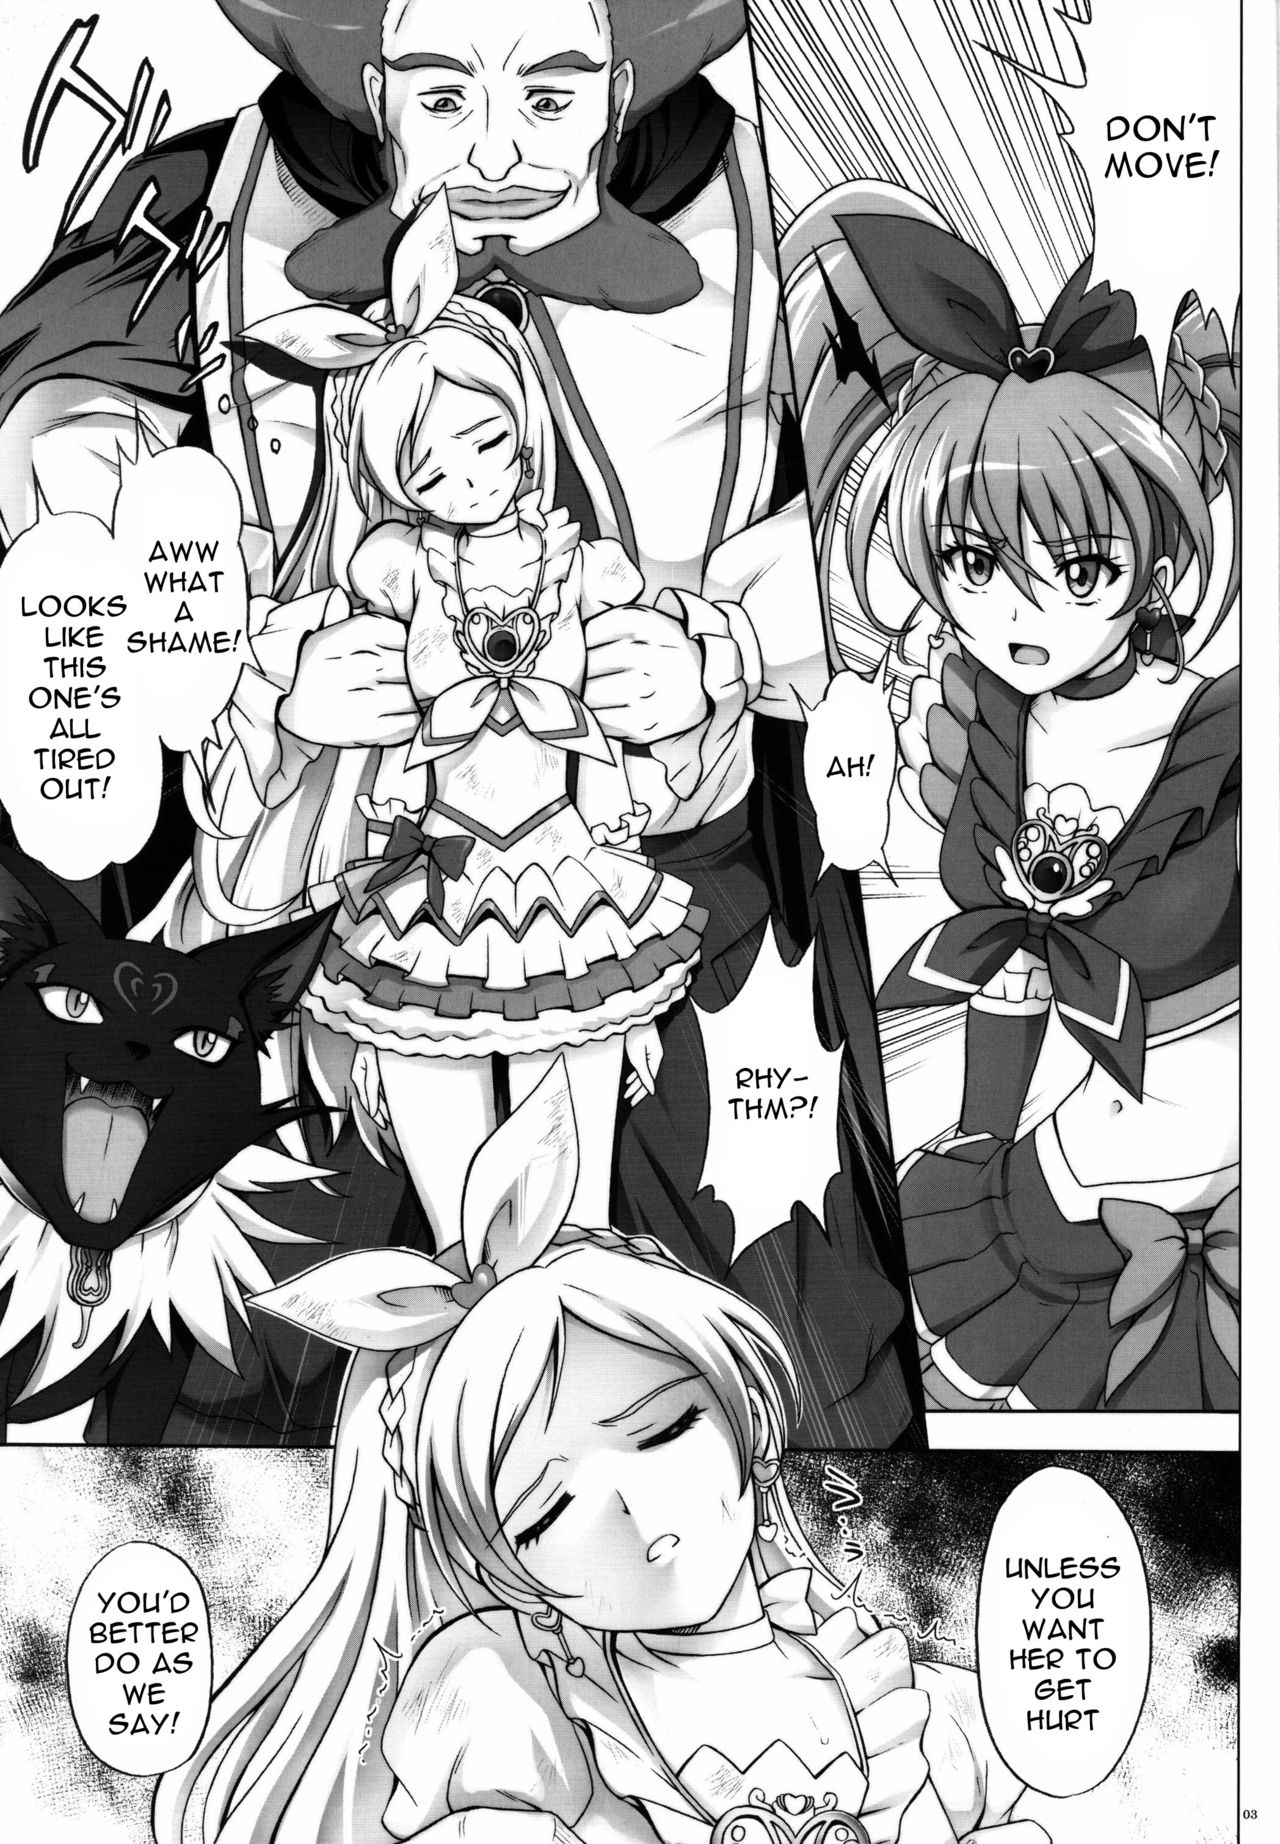 [Cyclone (Izumi, Reizei)] H-01 Melooo (Suite Precure) [eng] page 2 full